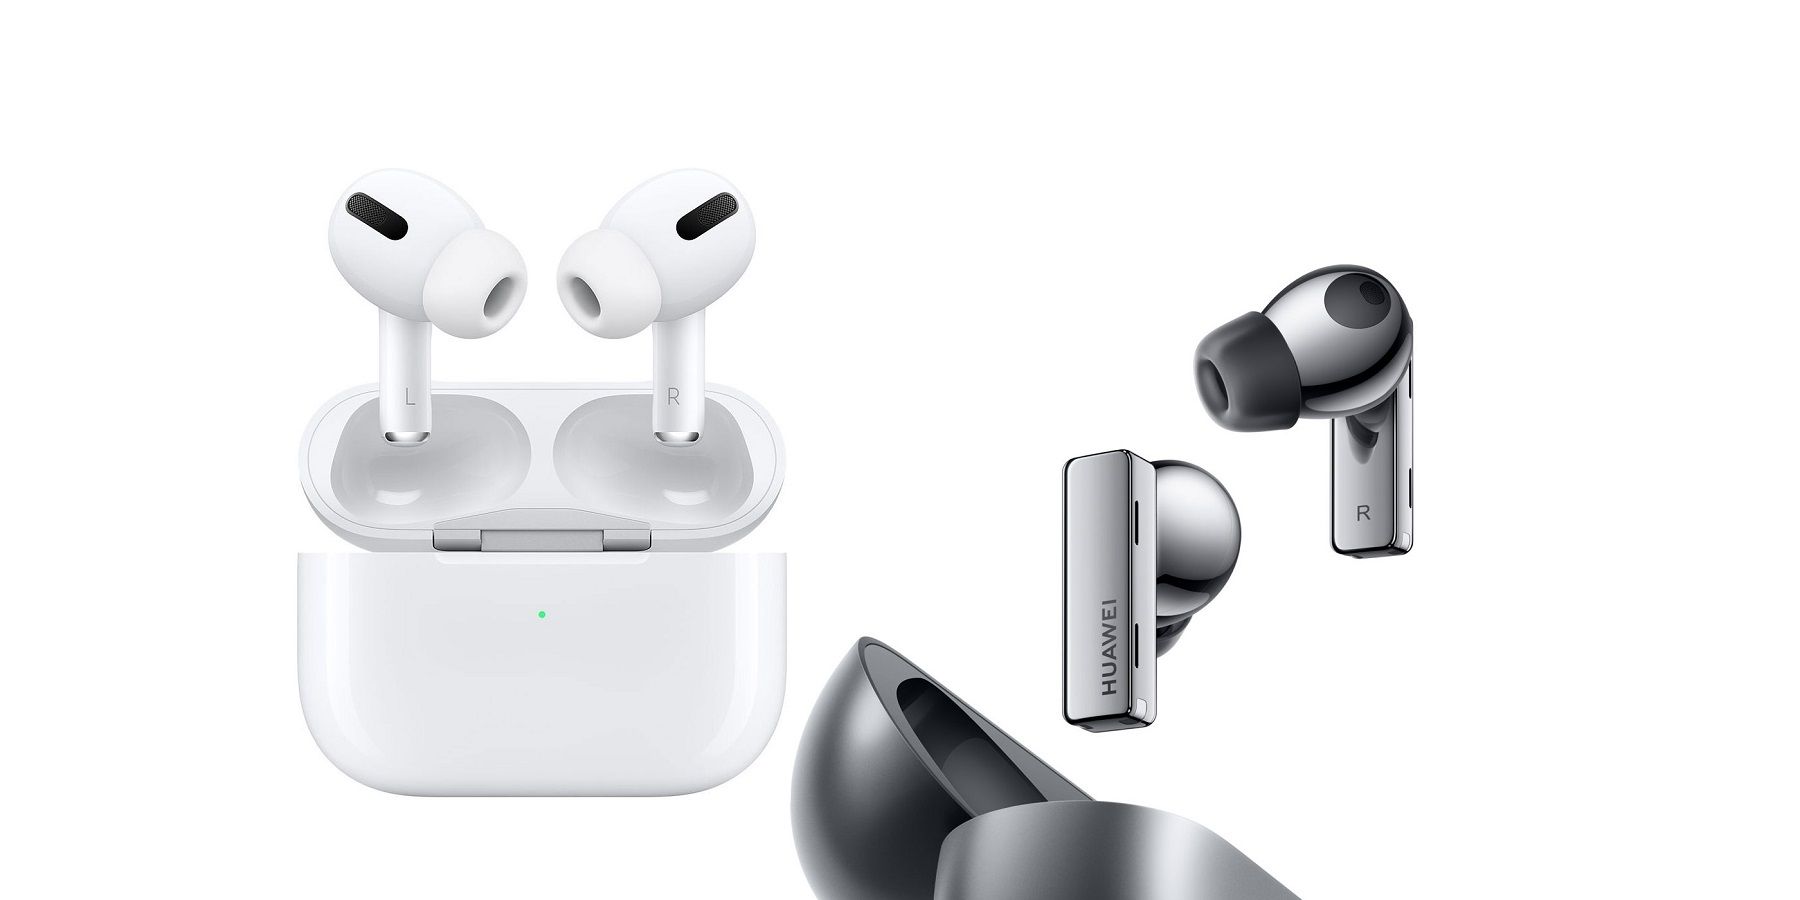 Pro Vs. FreeBuds How Apple Huawei's Earbuds Compare